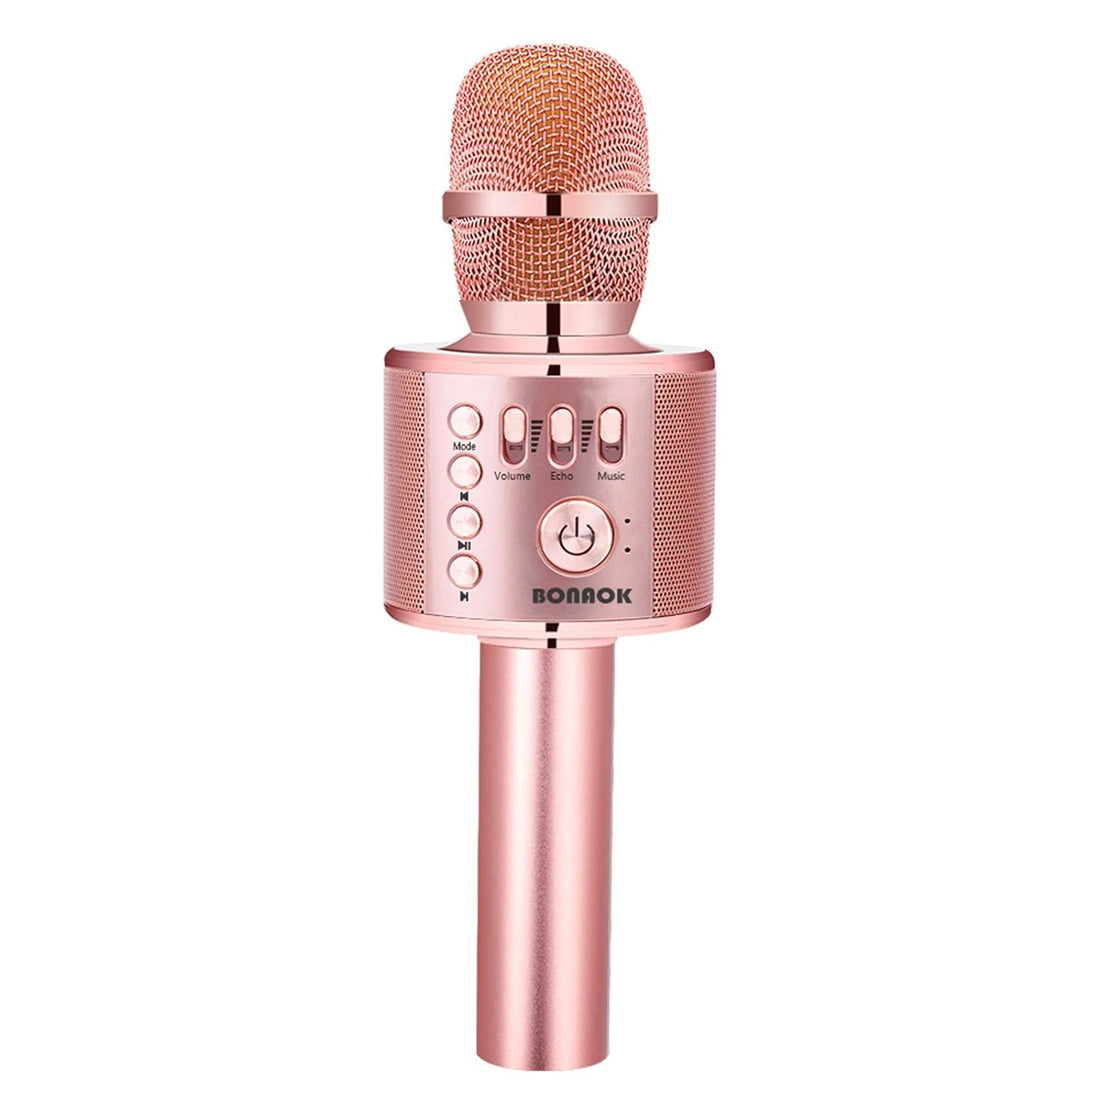 BONAOK Wireless Karaoke Microphone Rose Gold Plus,Valentine ' s Day Gift 3-in-1 Portable Built in Bluetooth Speaker Machine for Android/iPhone/iPad/Sony/PC or All Smartphone